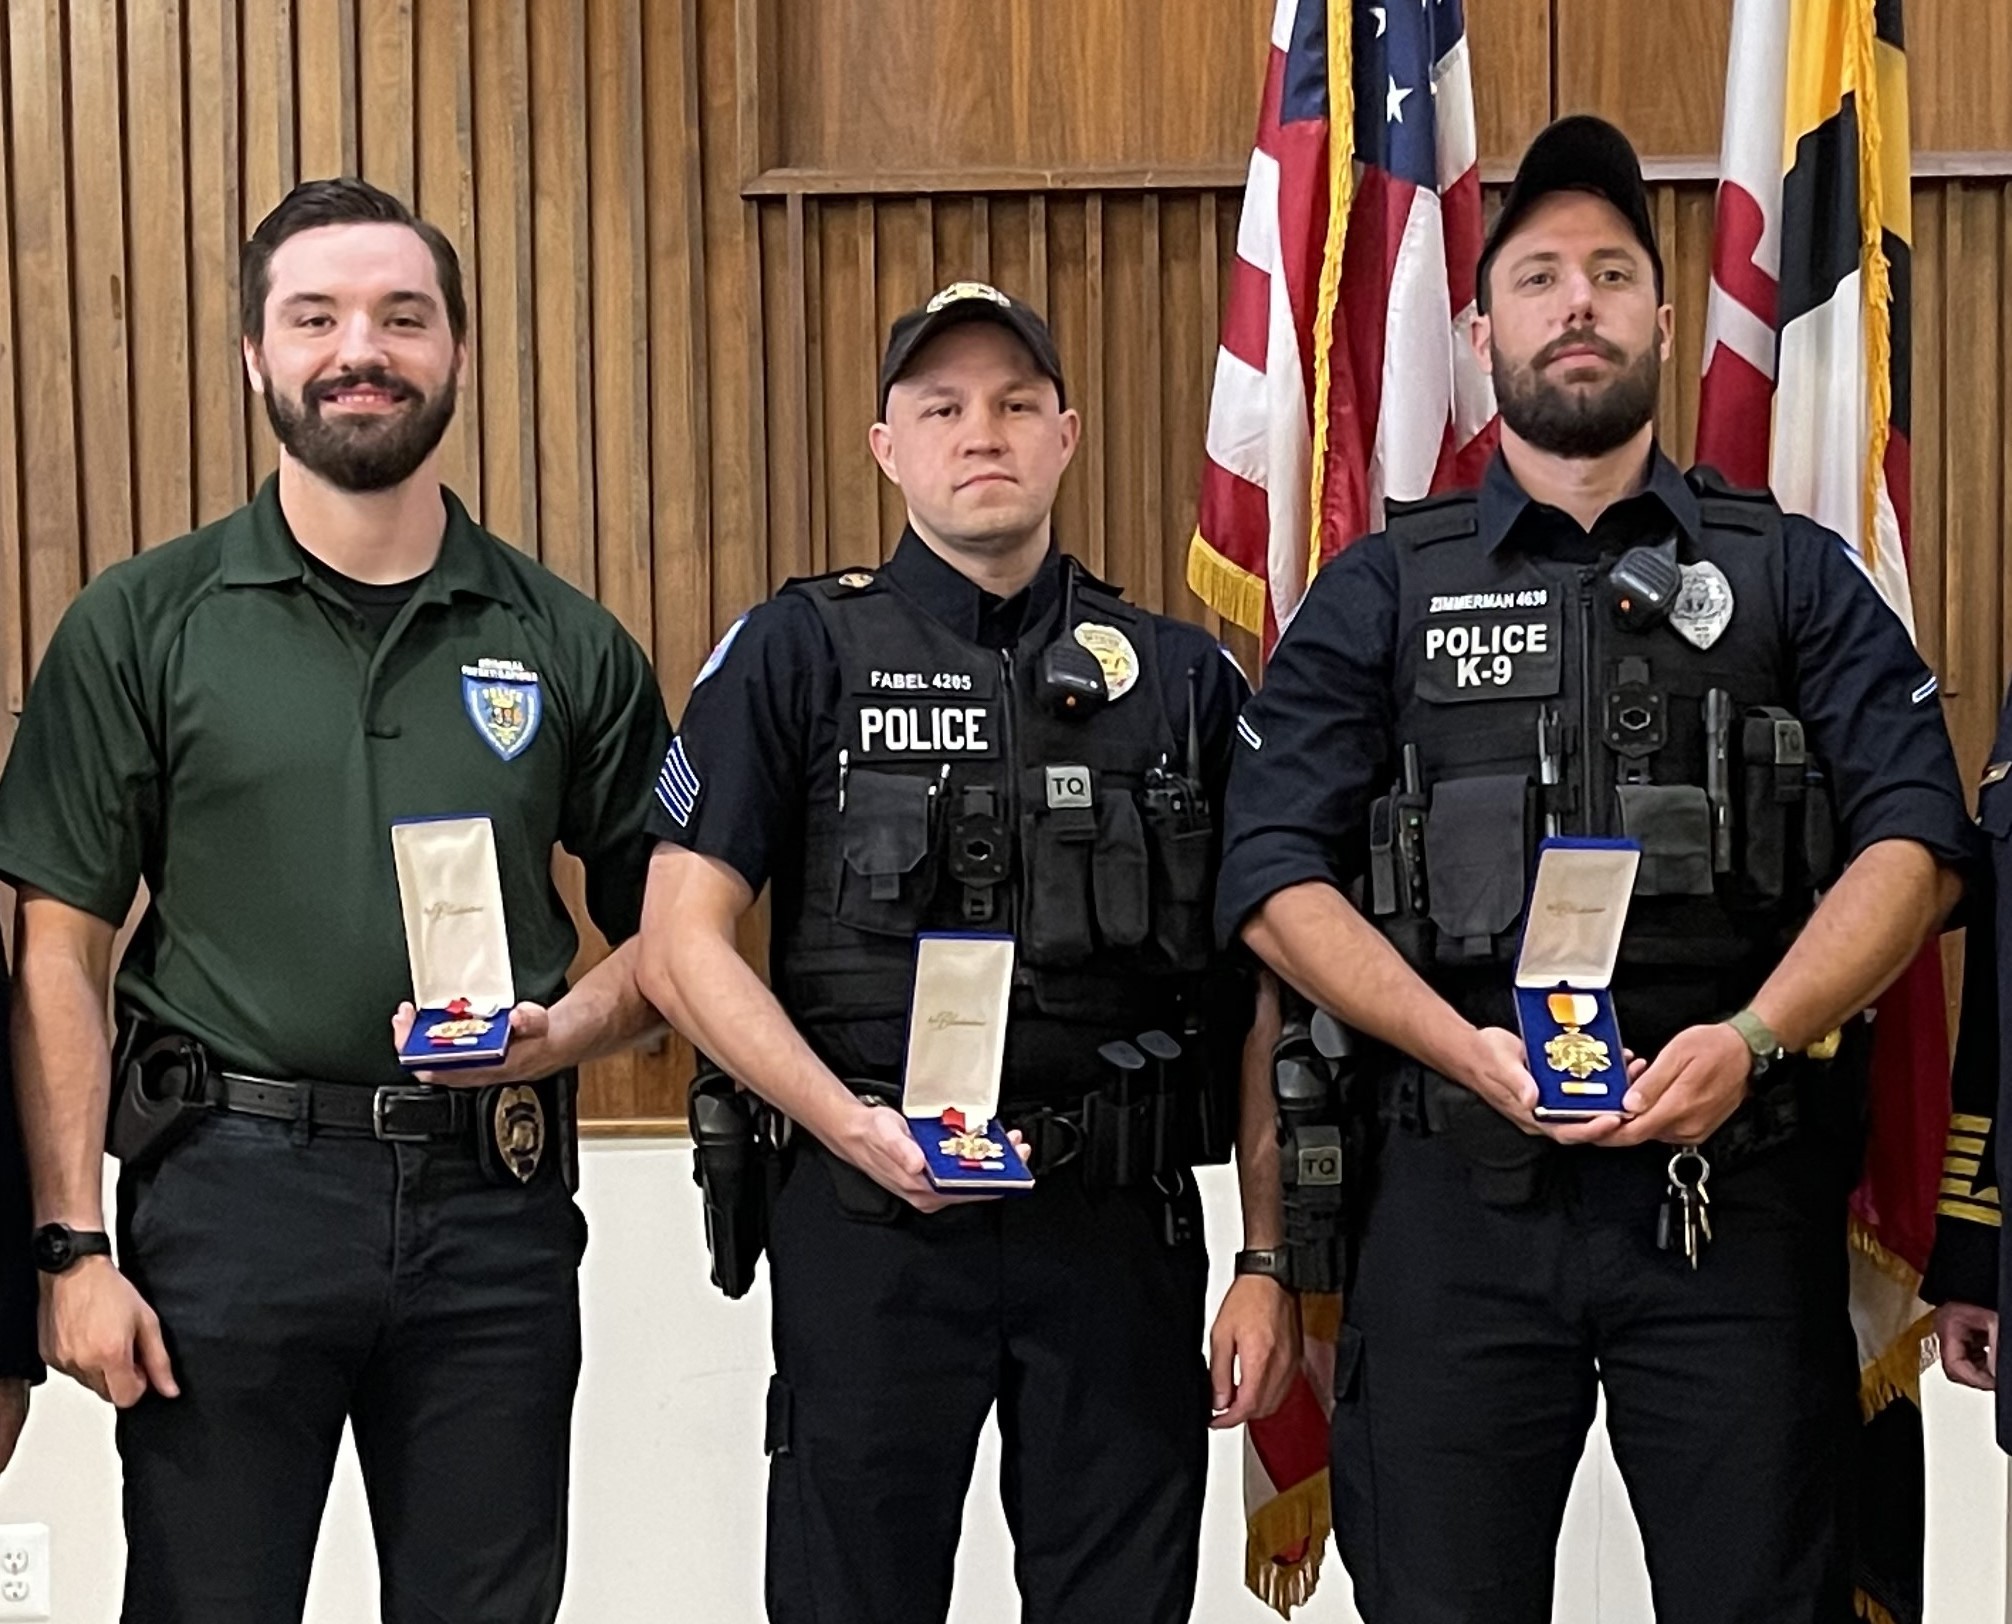 Police officers win highest honor